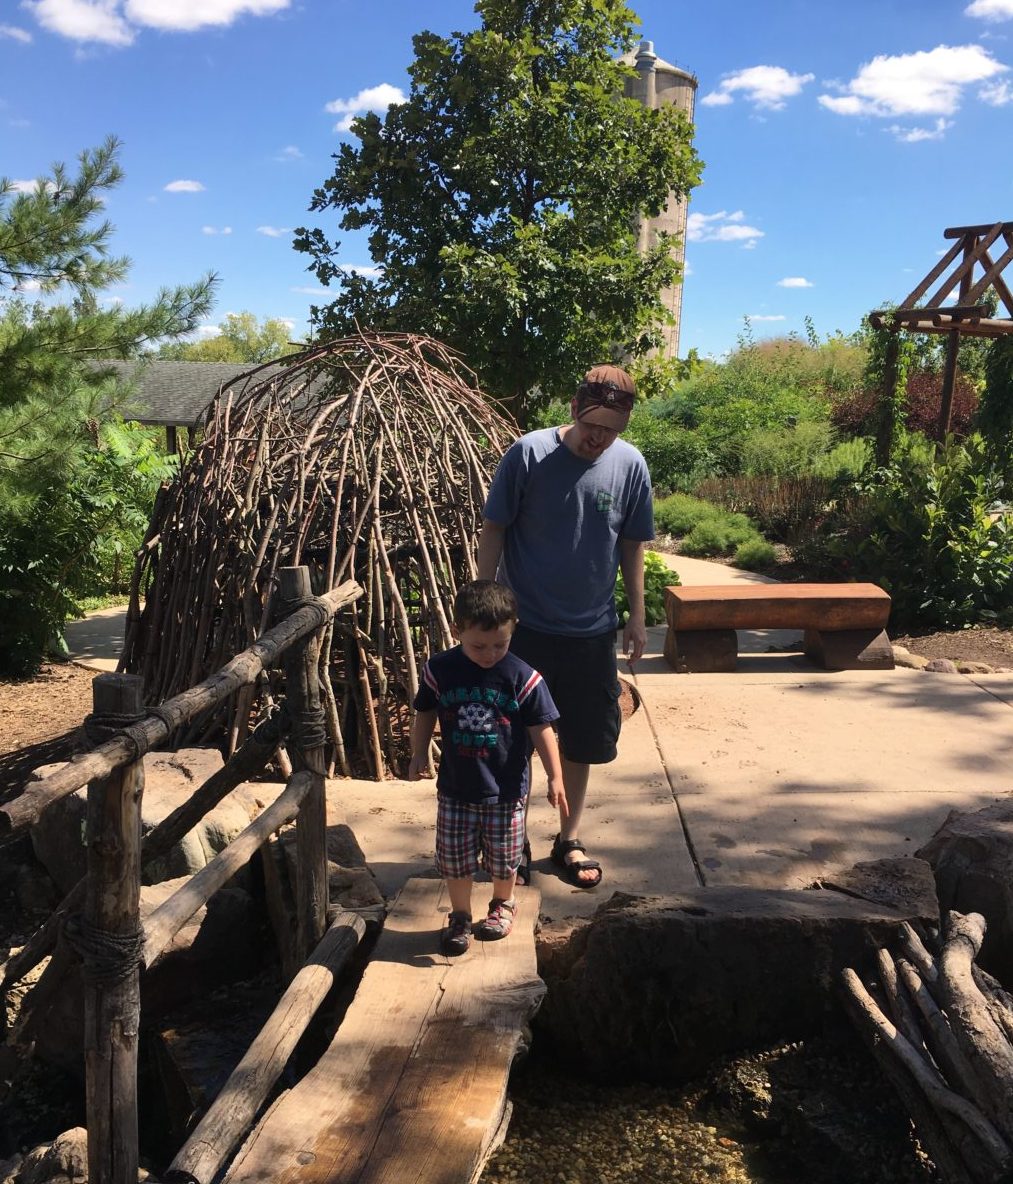 Father and son exploring nature playground bridge